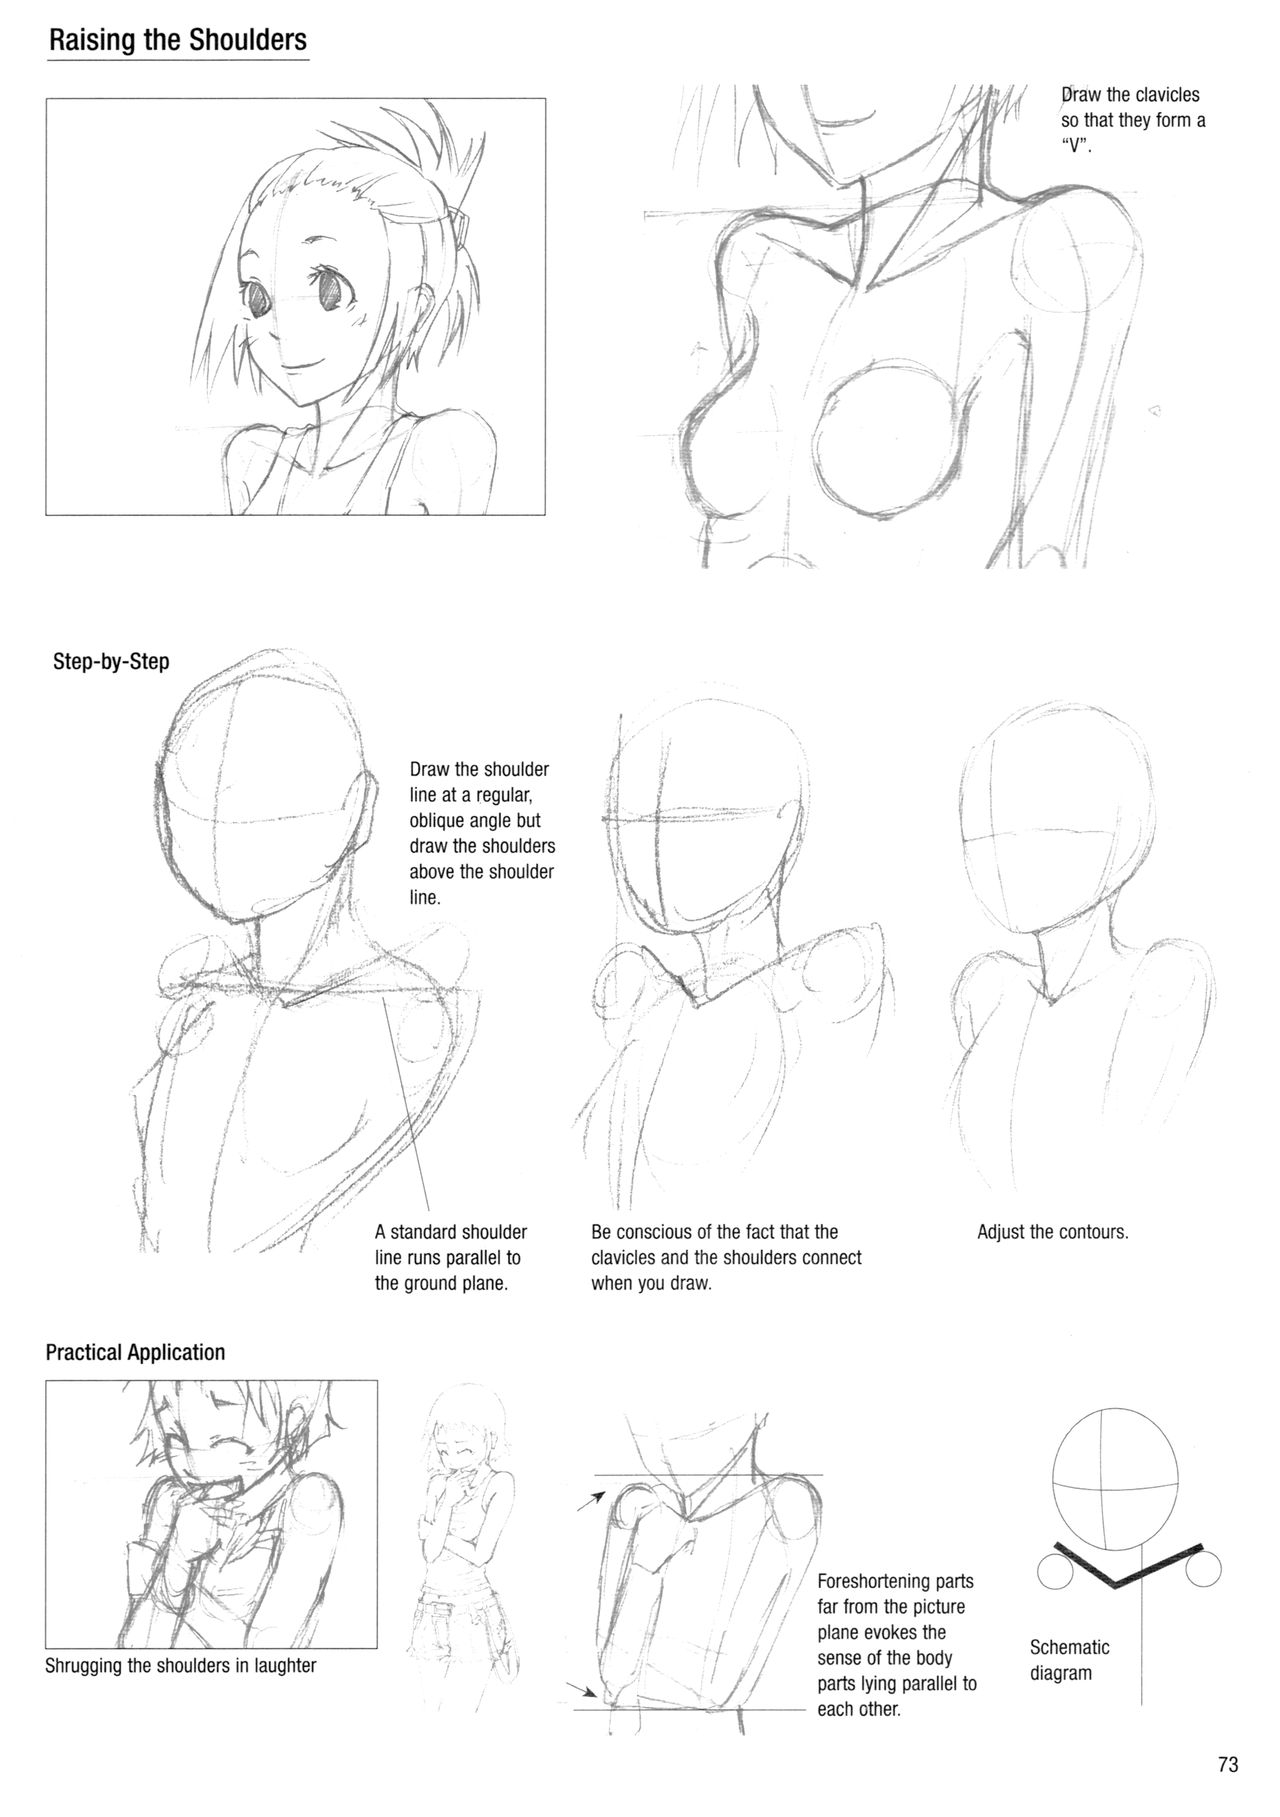 Sketching Manga-Style Vol. 3 - Unforgettable Characters 72